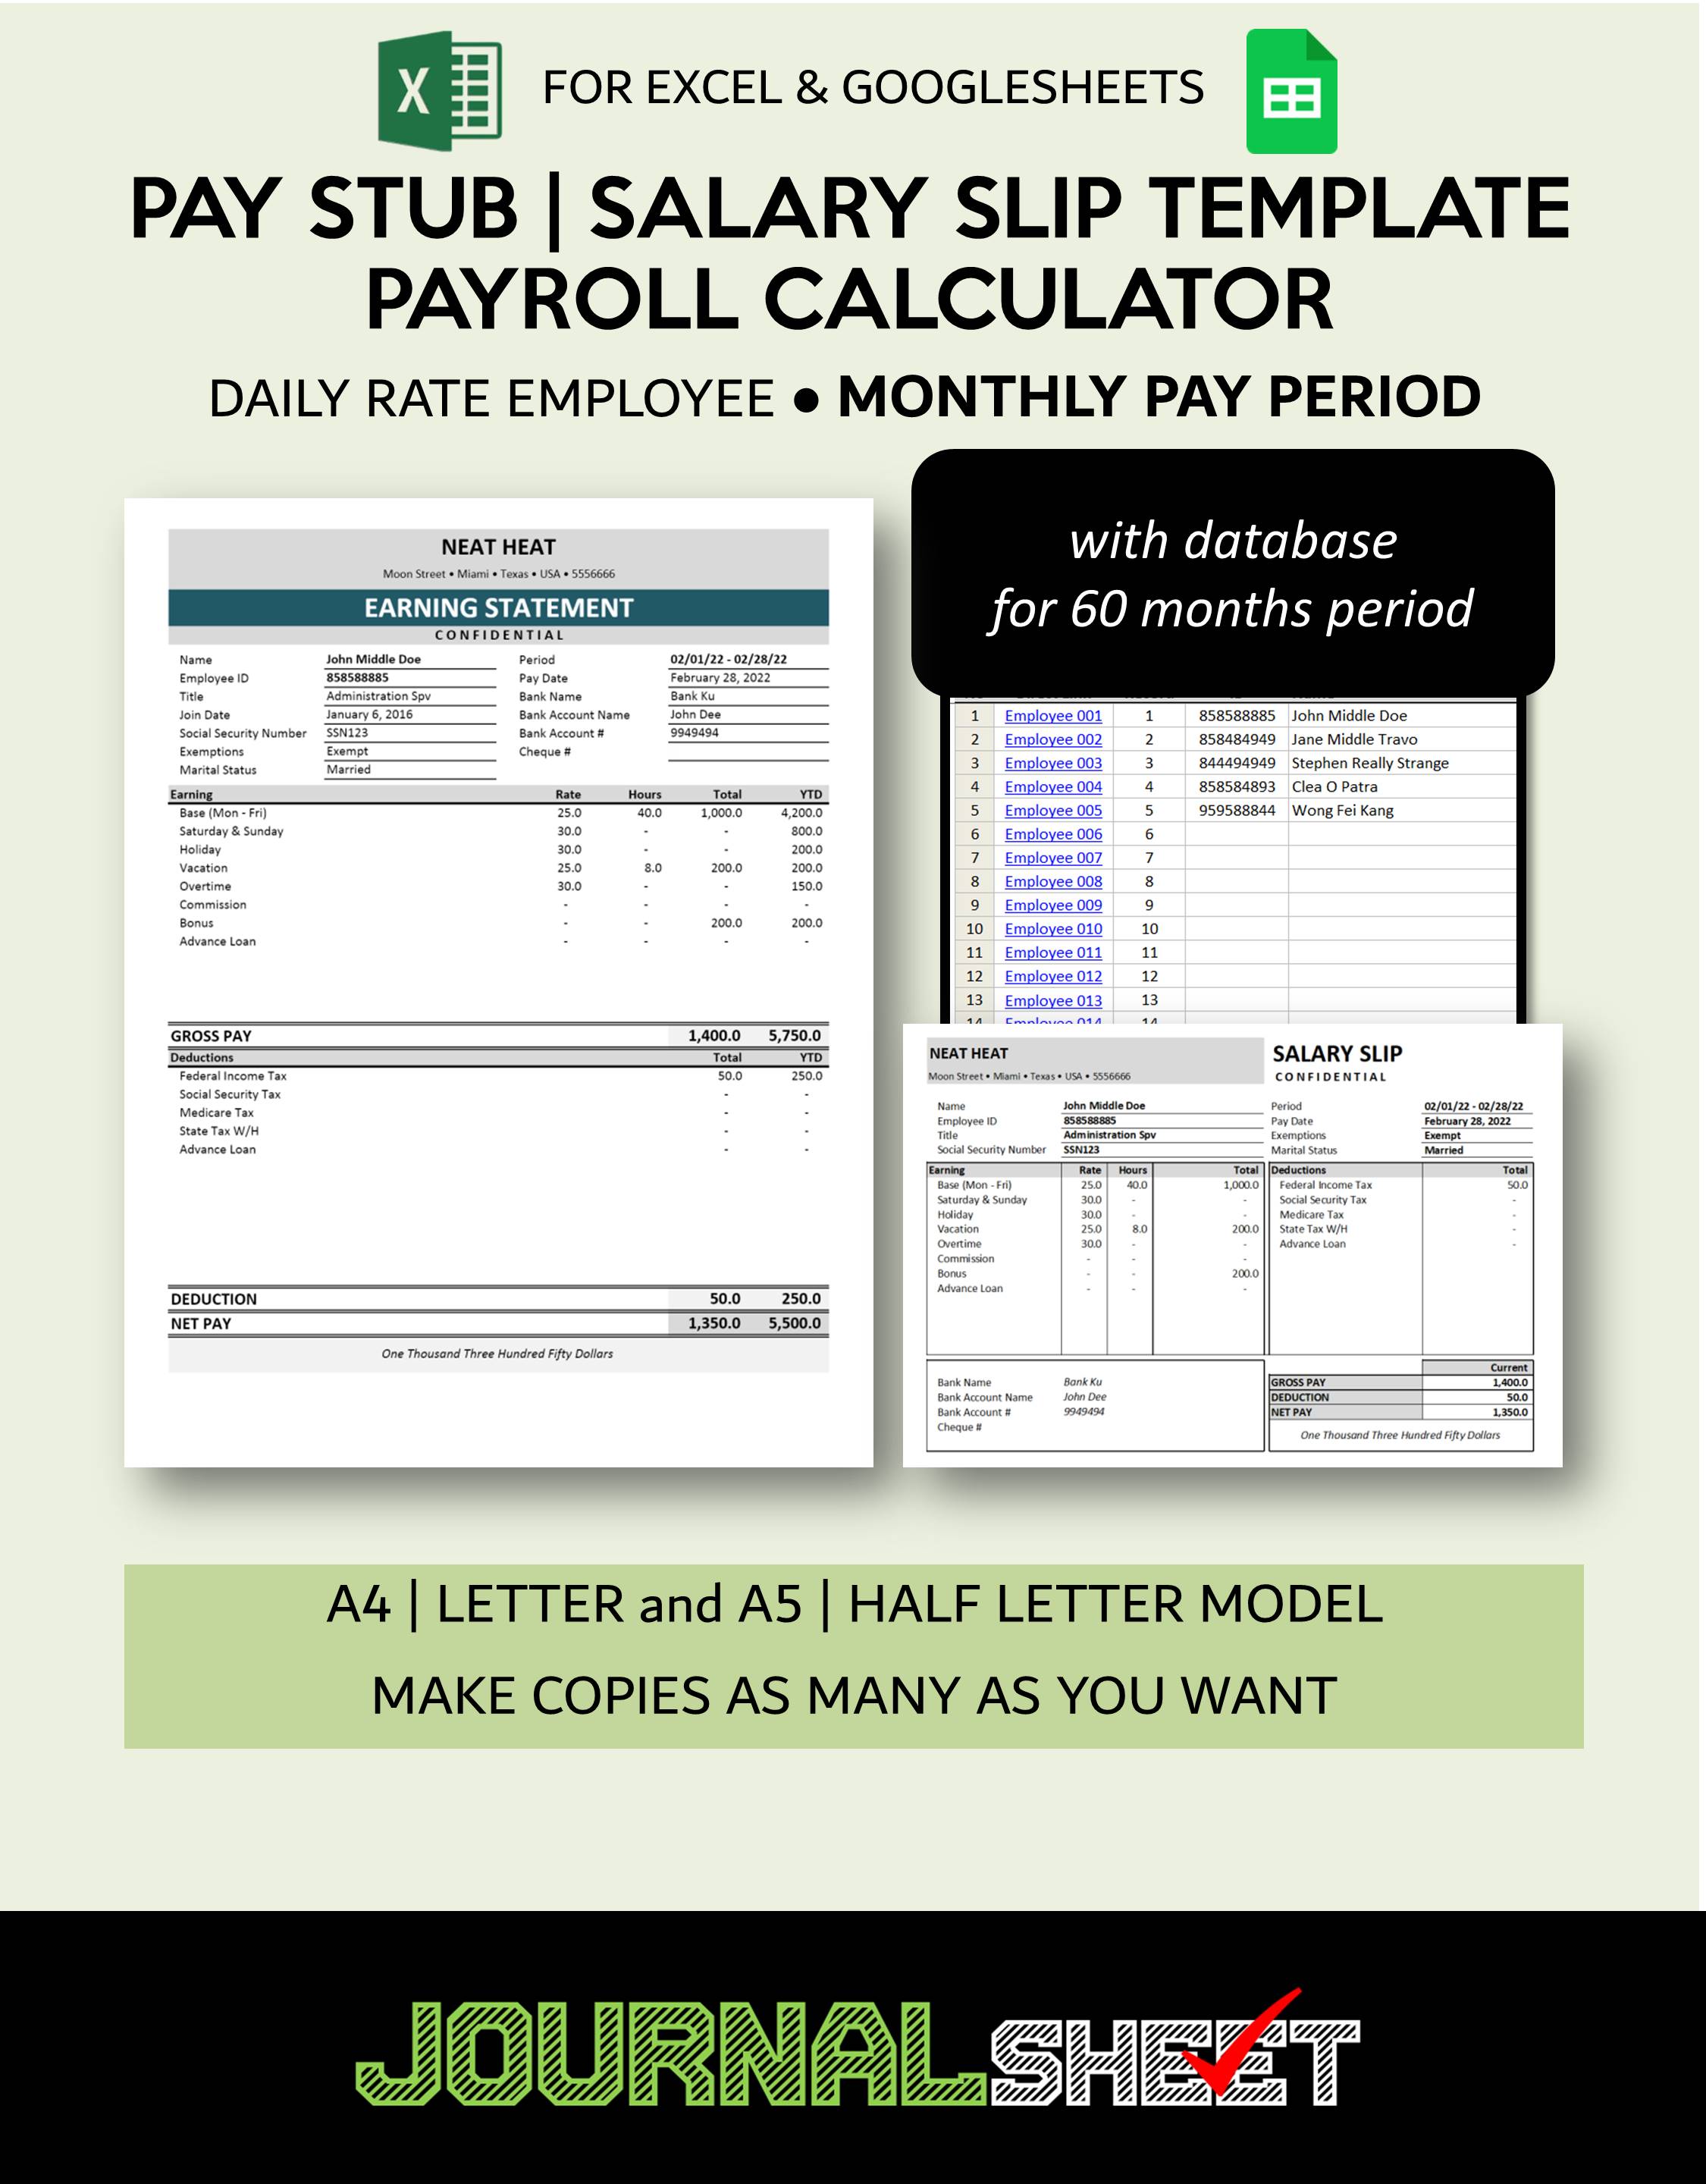 Pay Stub - Salary Slip Template - Daily Rate - Monthly Payment Period